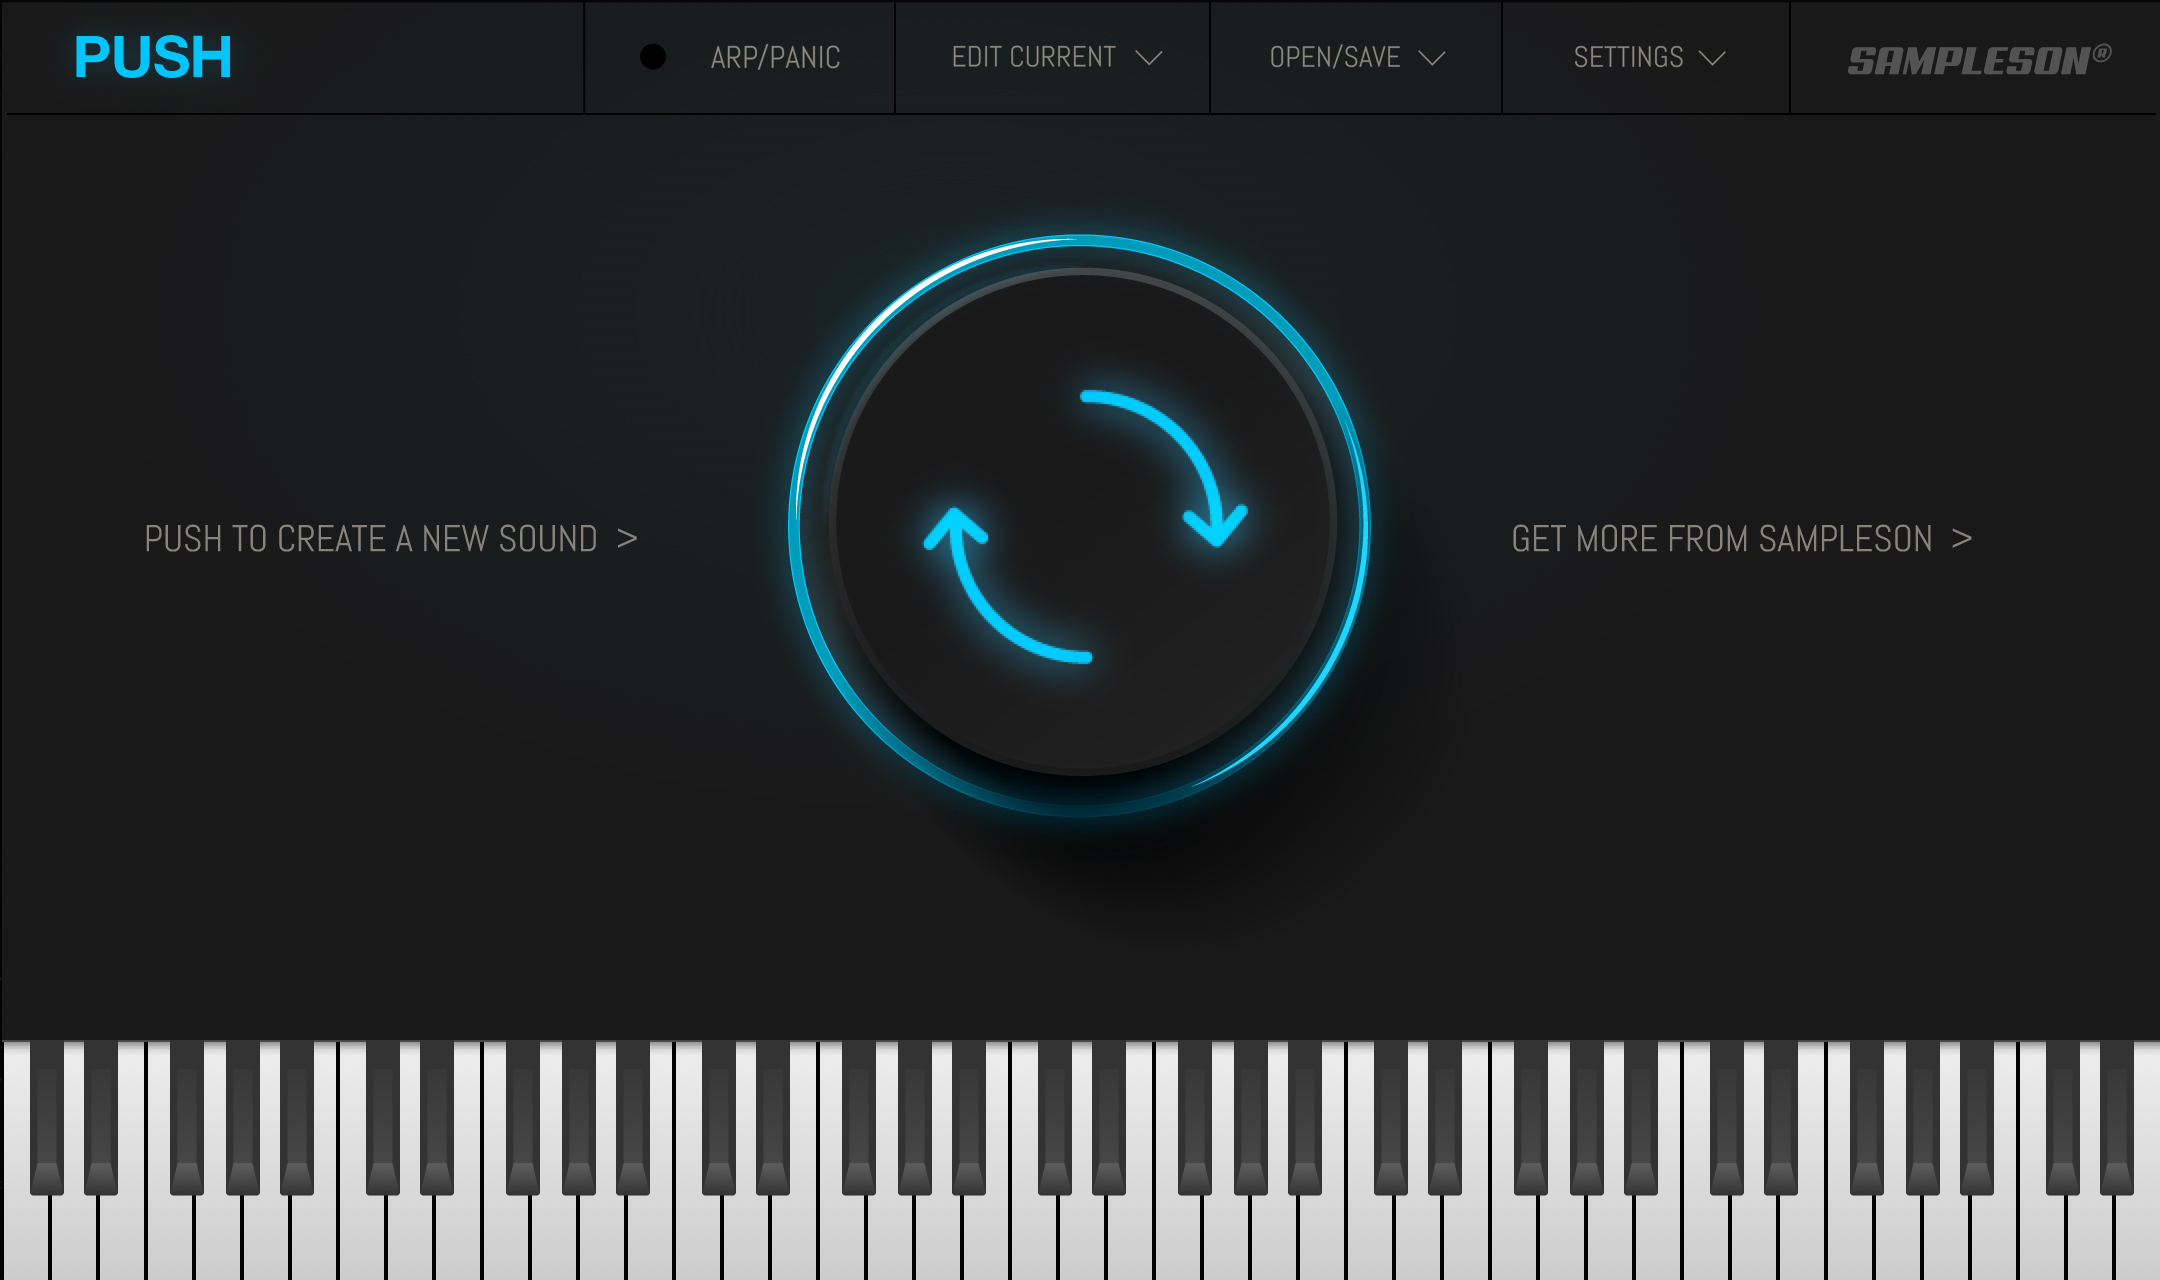 PUSH free software-synthesizer by Sampleson